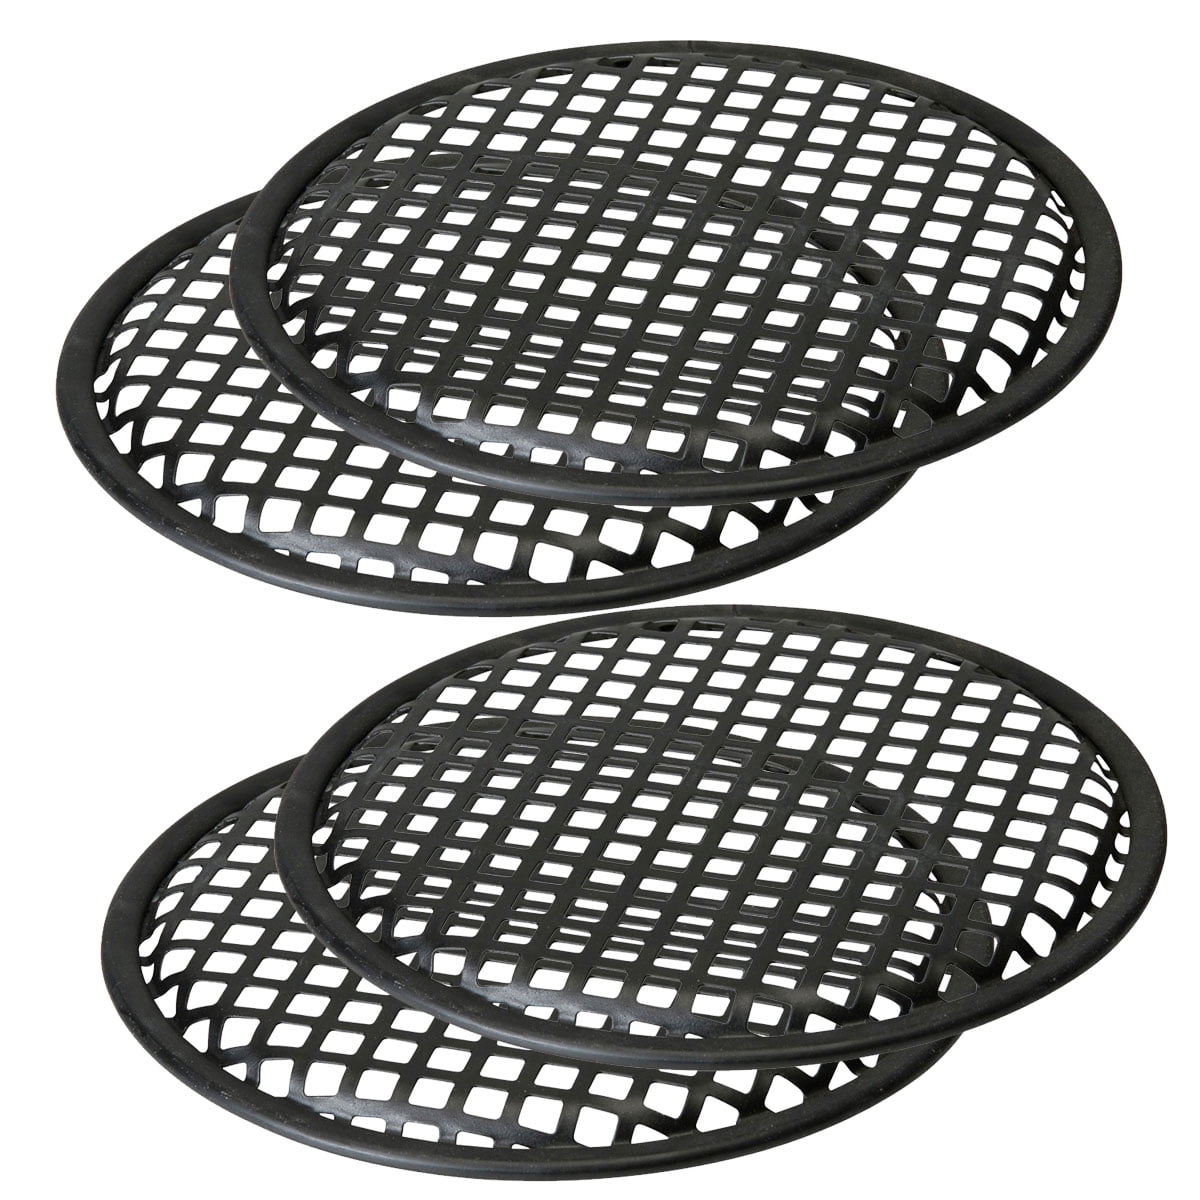 HIGH QUALITY UNIVERSAL CAR AUDIO 10" PROTECTIVE SUB WOOFER GRILLE 10 INCH GRILL 